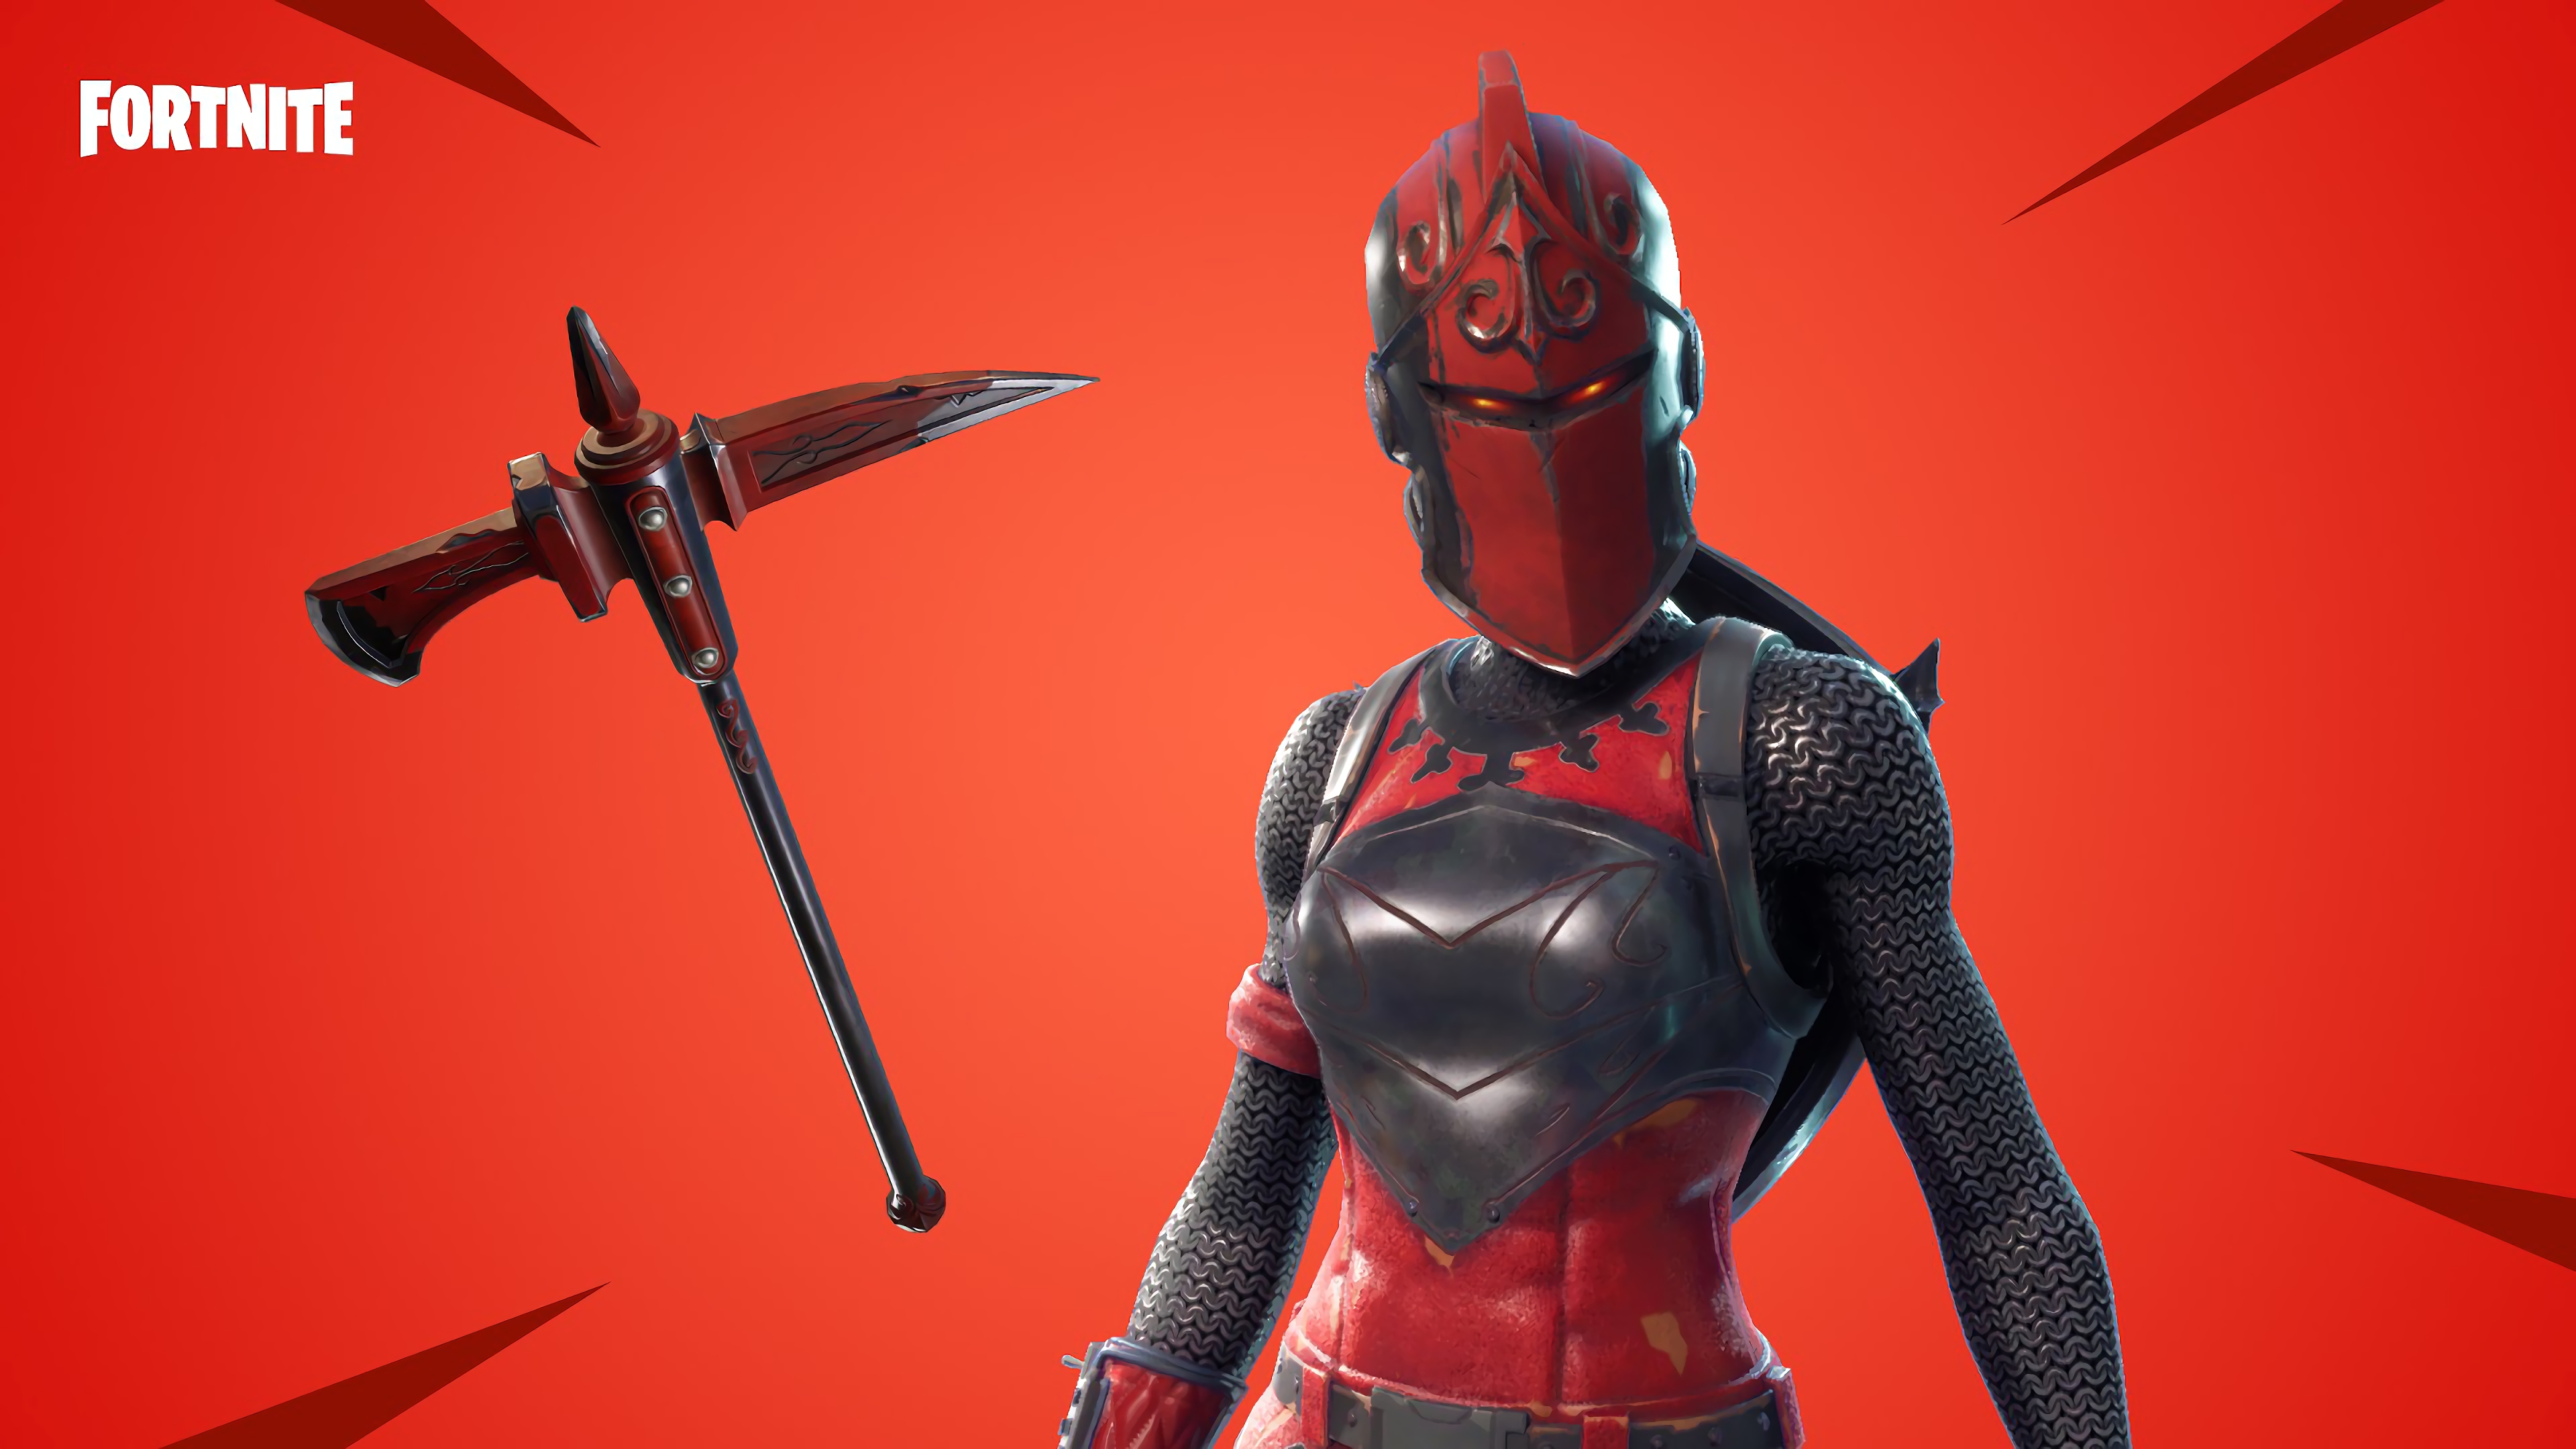 Official Wallpaper Of Red Knight From Fortnite Game Paperpull